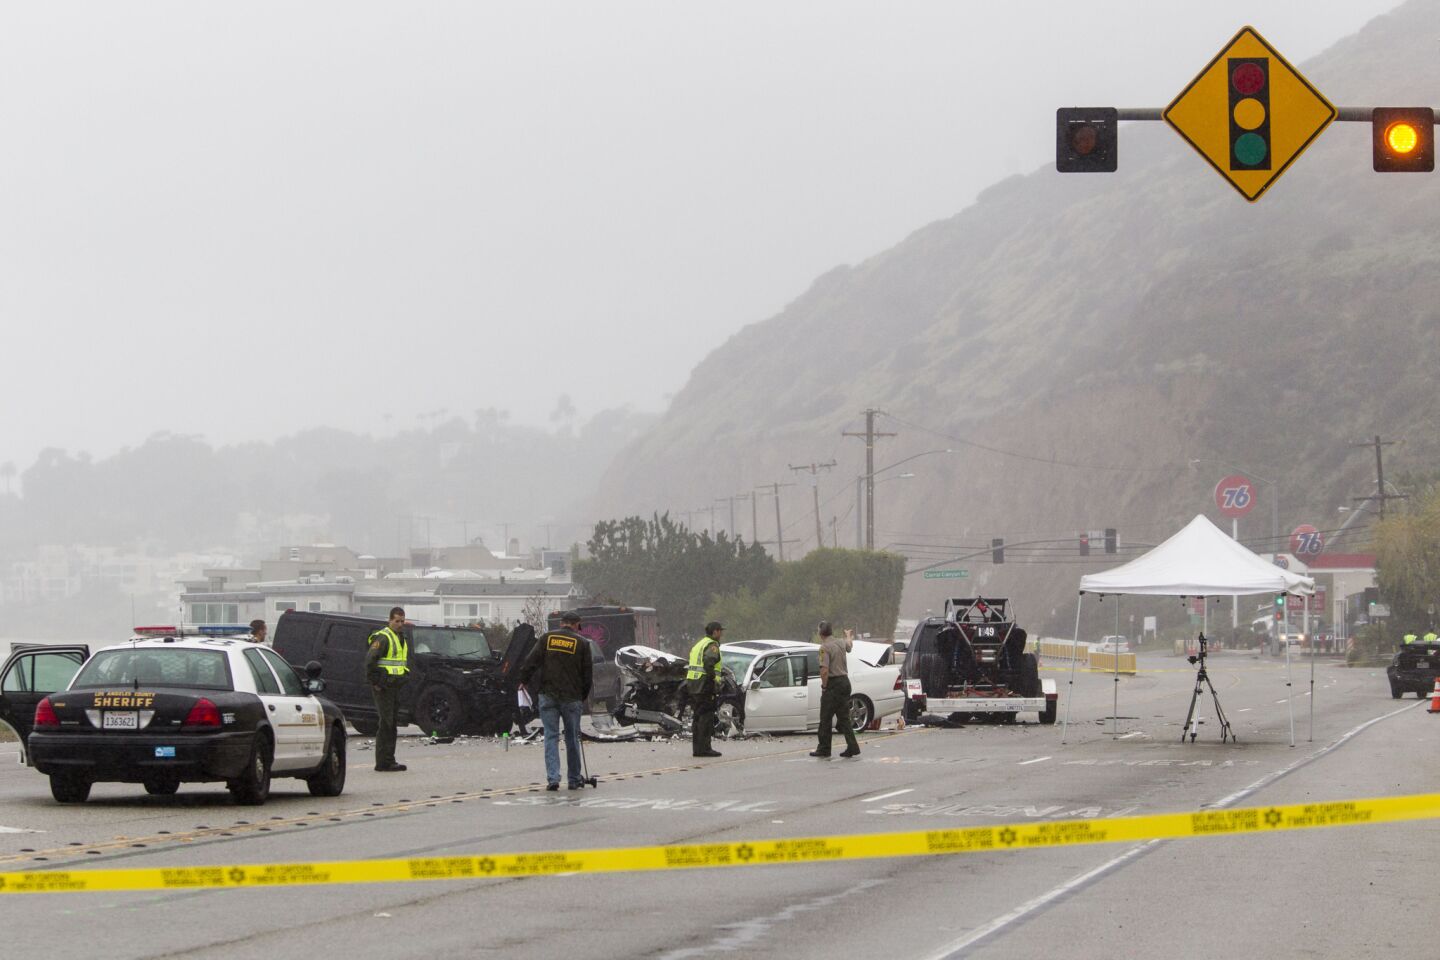 Los Angeles County Sheriff's deputies at the scene. There have been reports that paparazzi photographers also were at the scene of the collision.